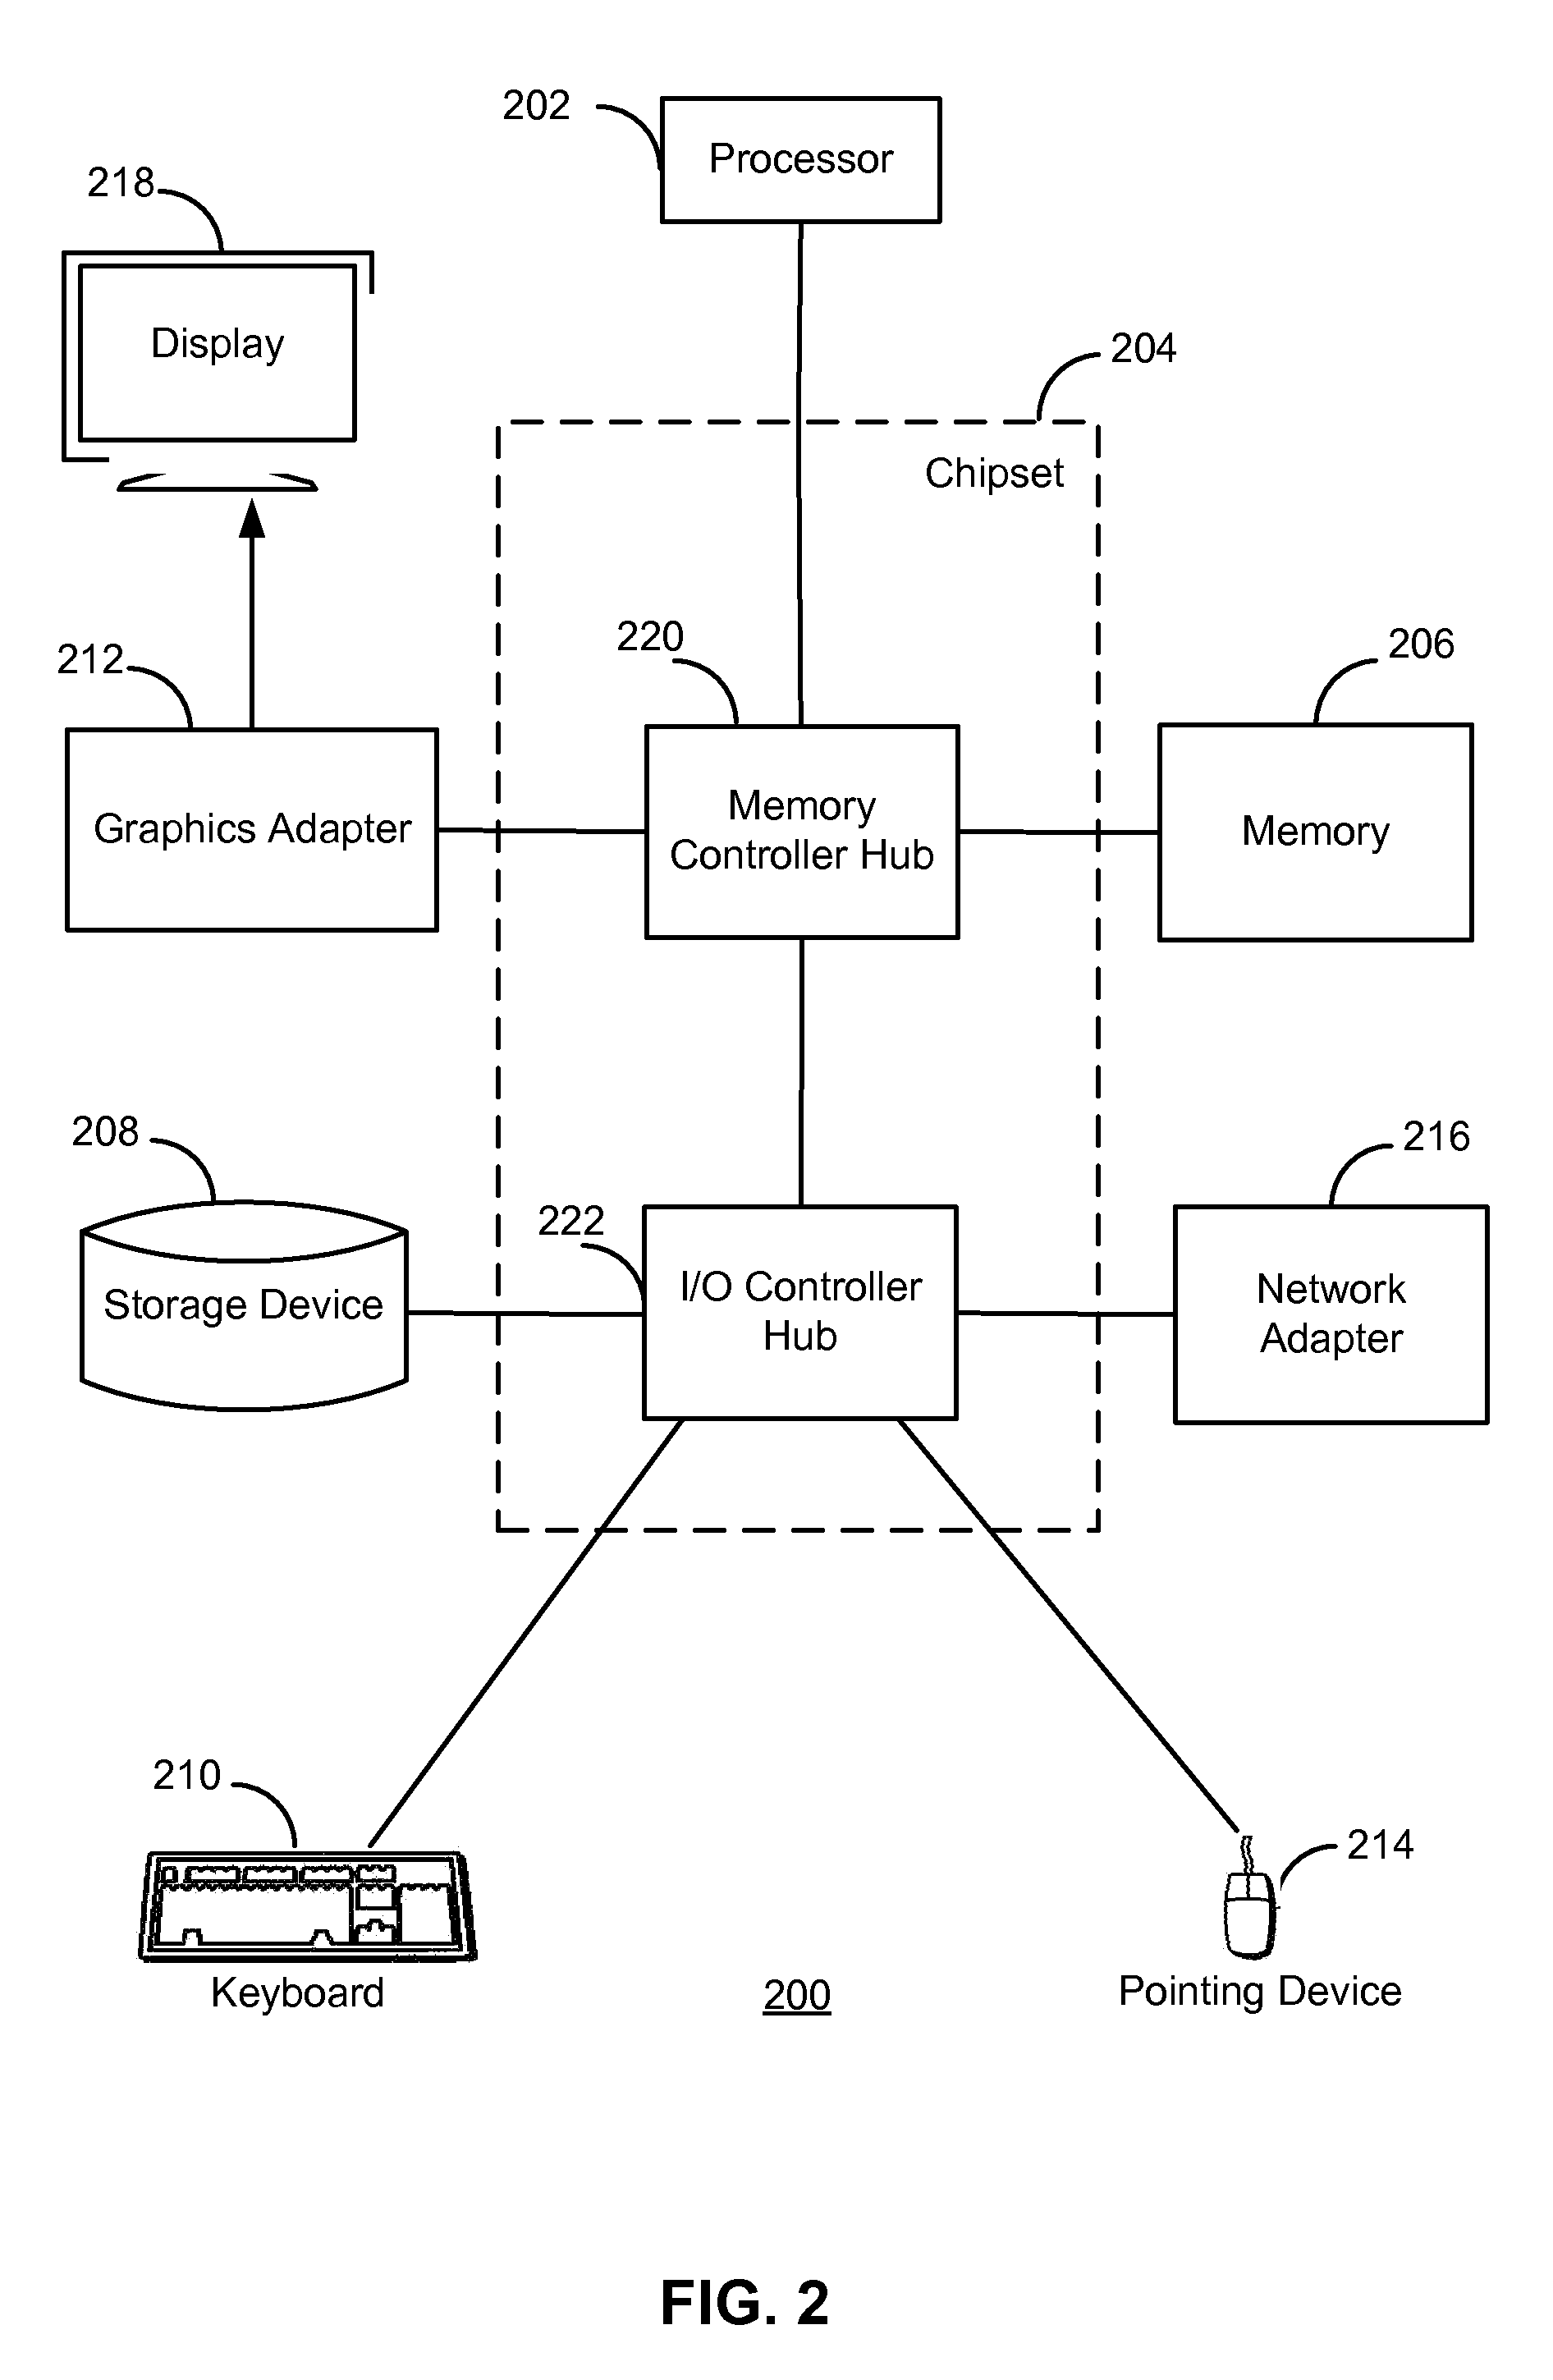 Automated generation of access control rules for use in a distributed network management system that uses a label-based policy model